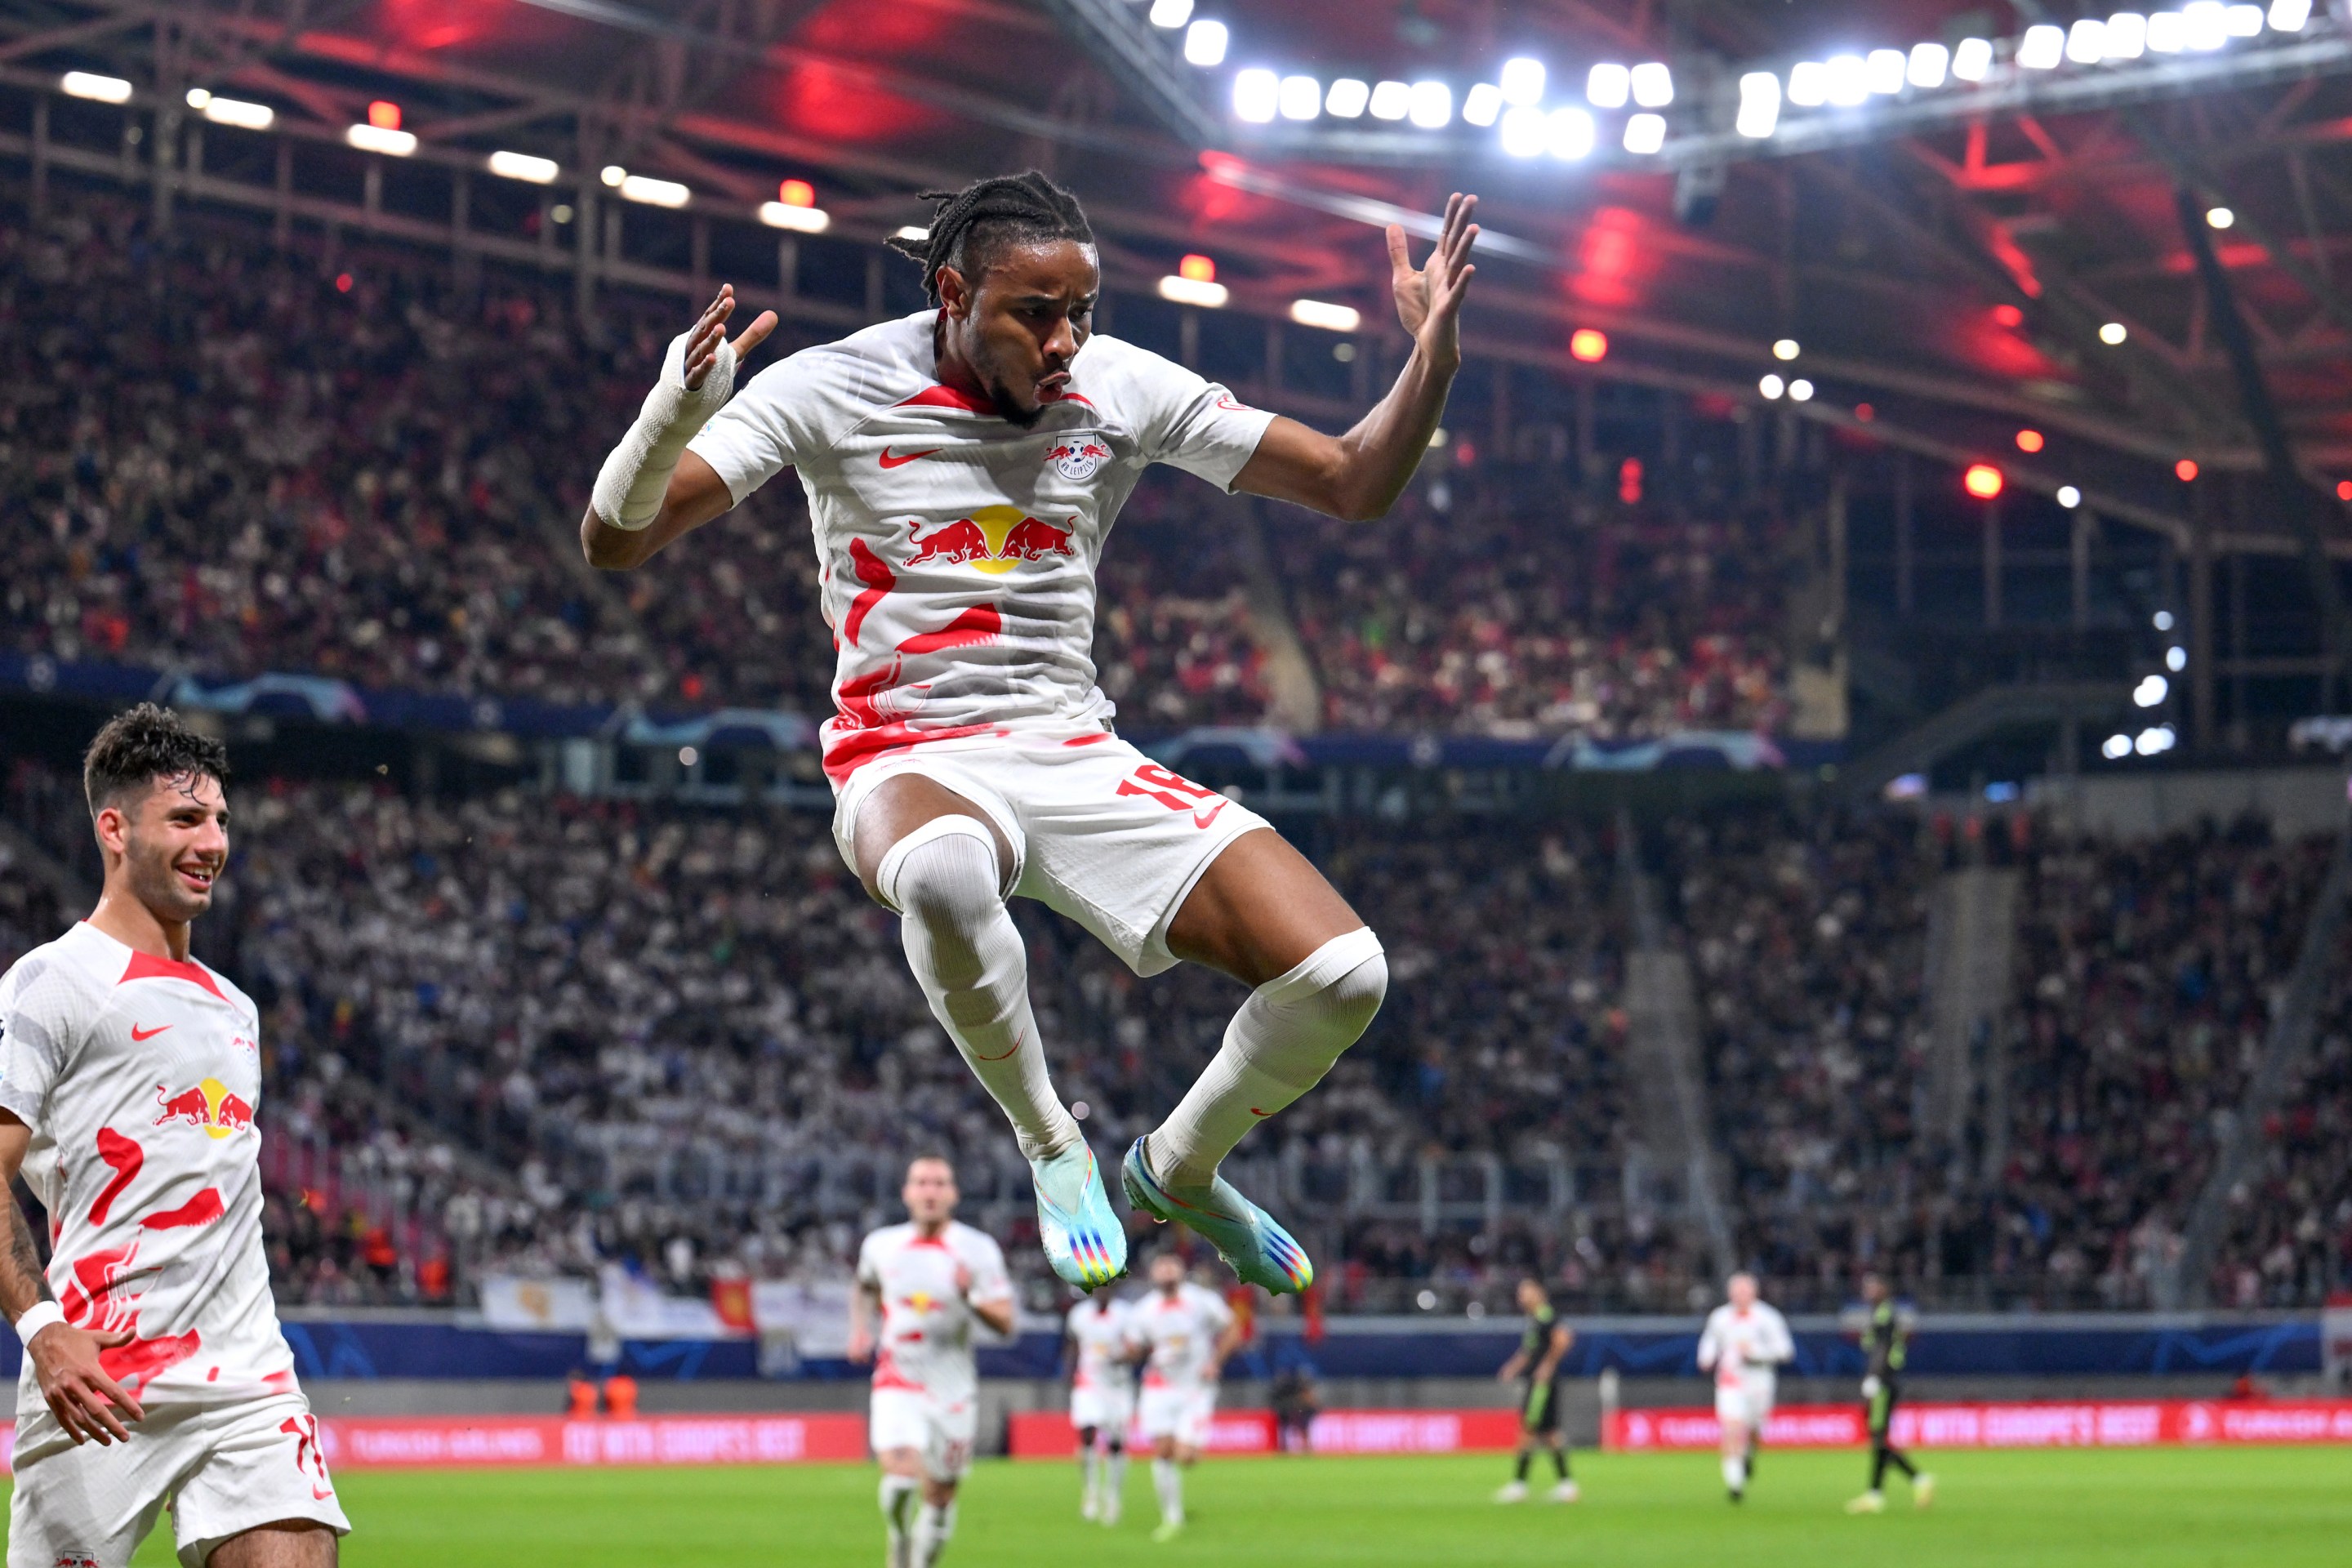 Christopher Nkunku of RB Leipzig celebrates scoring their side's second goal with teammates during the UEFA Champions League group F match between RB Leipzig and Real Madrid at Red Bull Arena on October 25, 2022 in Leipzig, Germany.